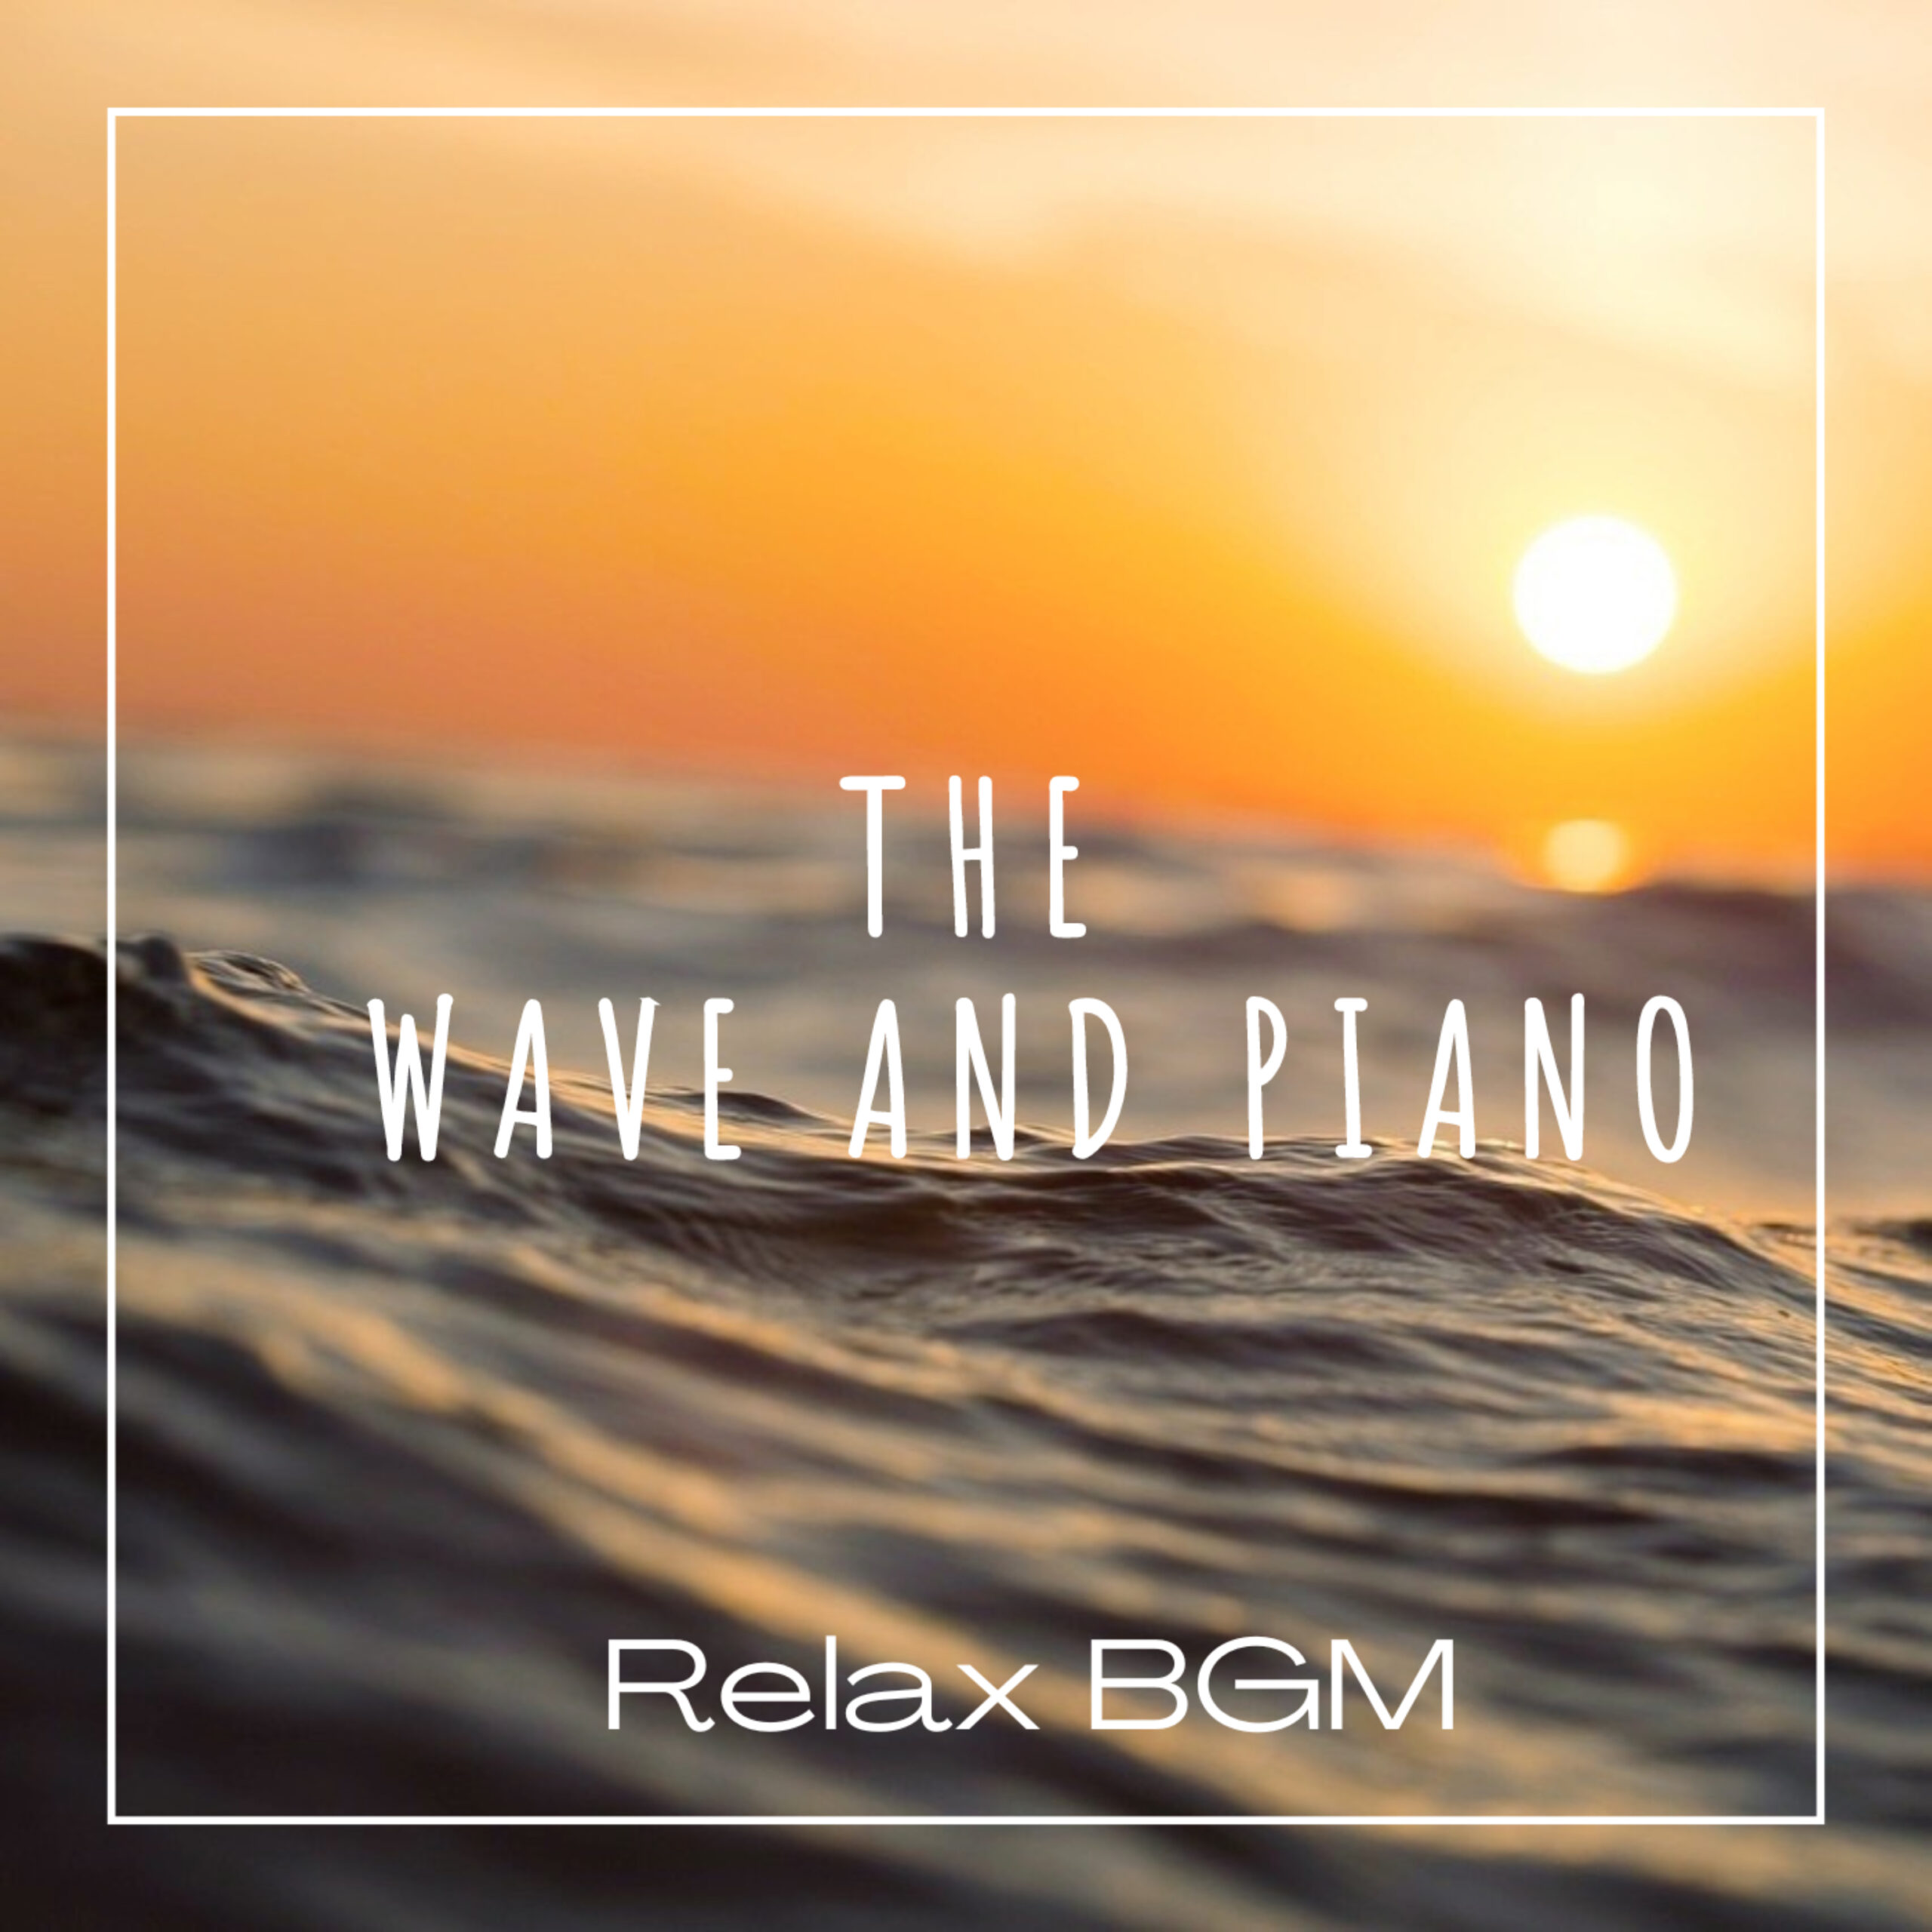 THE WAVE AND PIANO -Relax BGM- 睡眠用 作業用 読書用 勉強用-